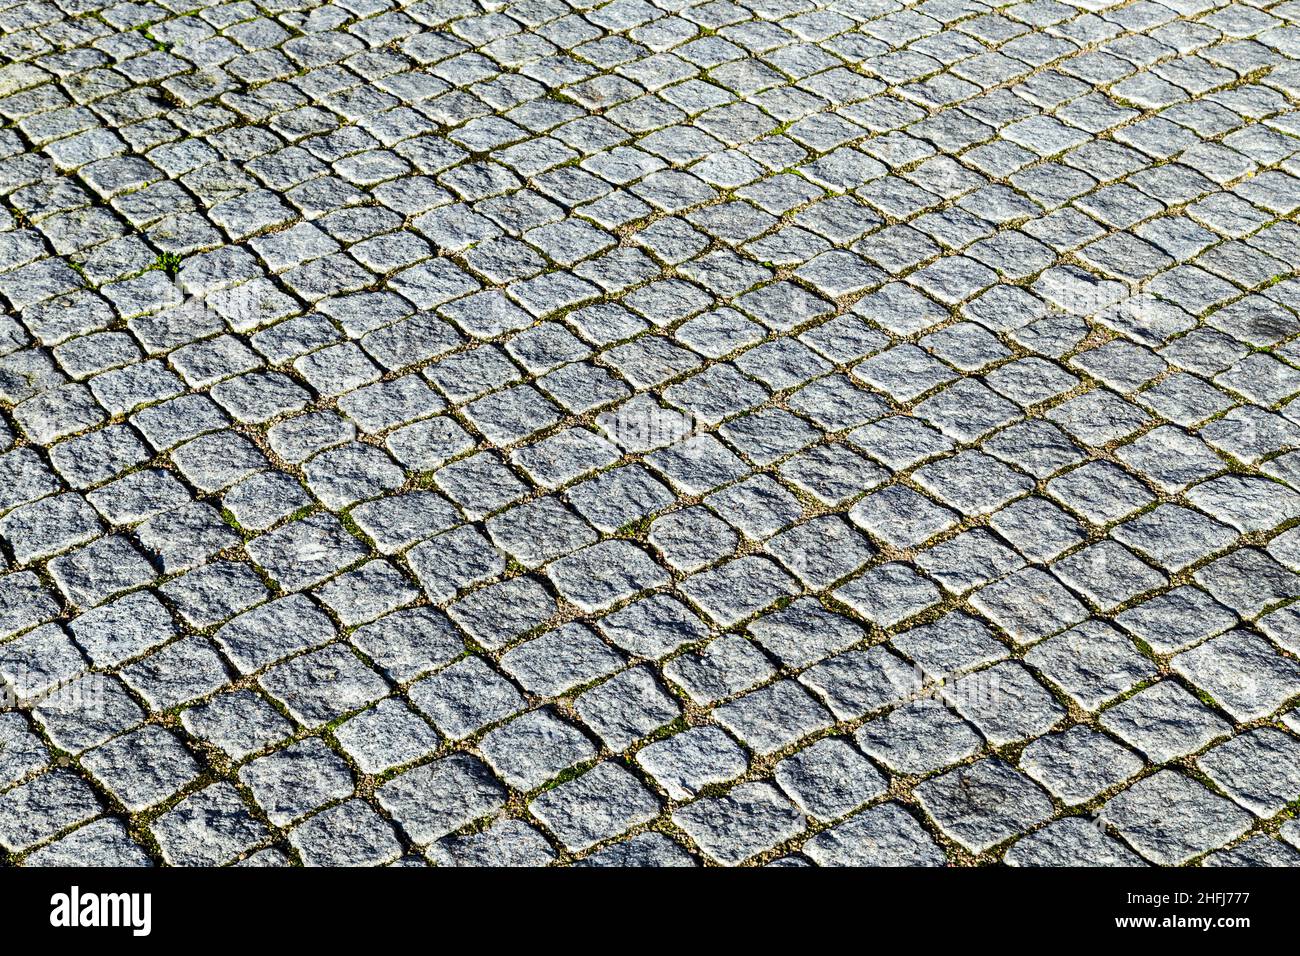 pattern of grey cobble stones at the paveway Stock Photo